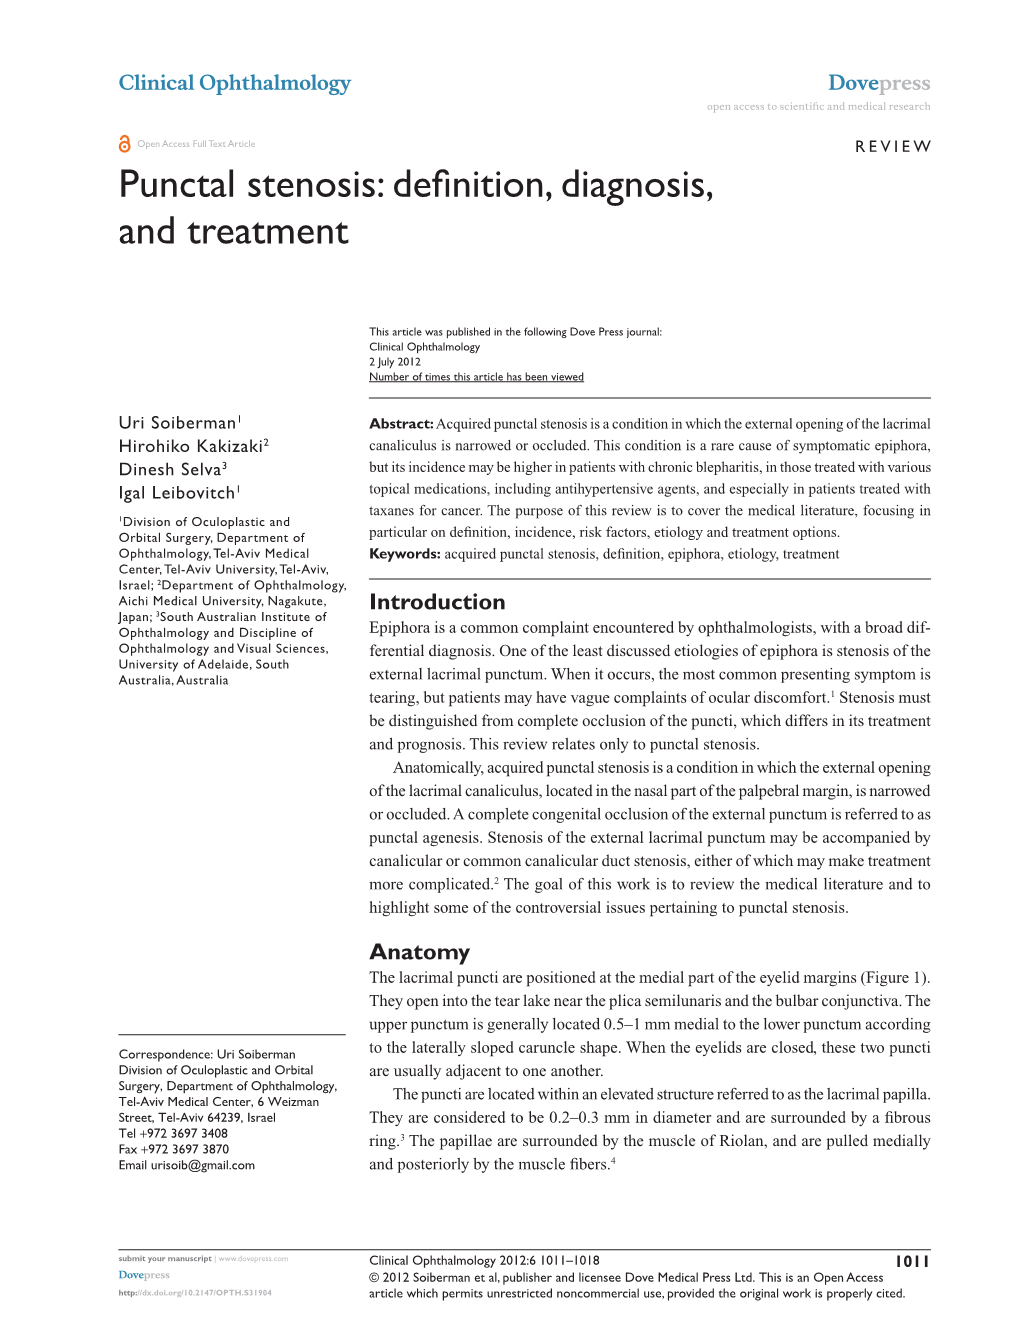 Punctal Stenosis: Definition, Diagnosis, and Treatment